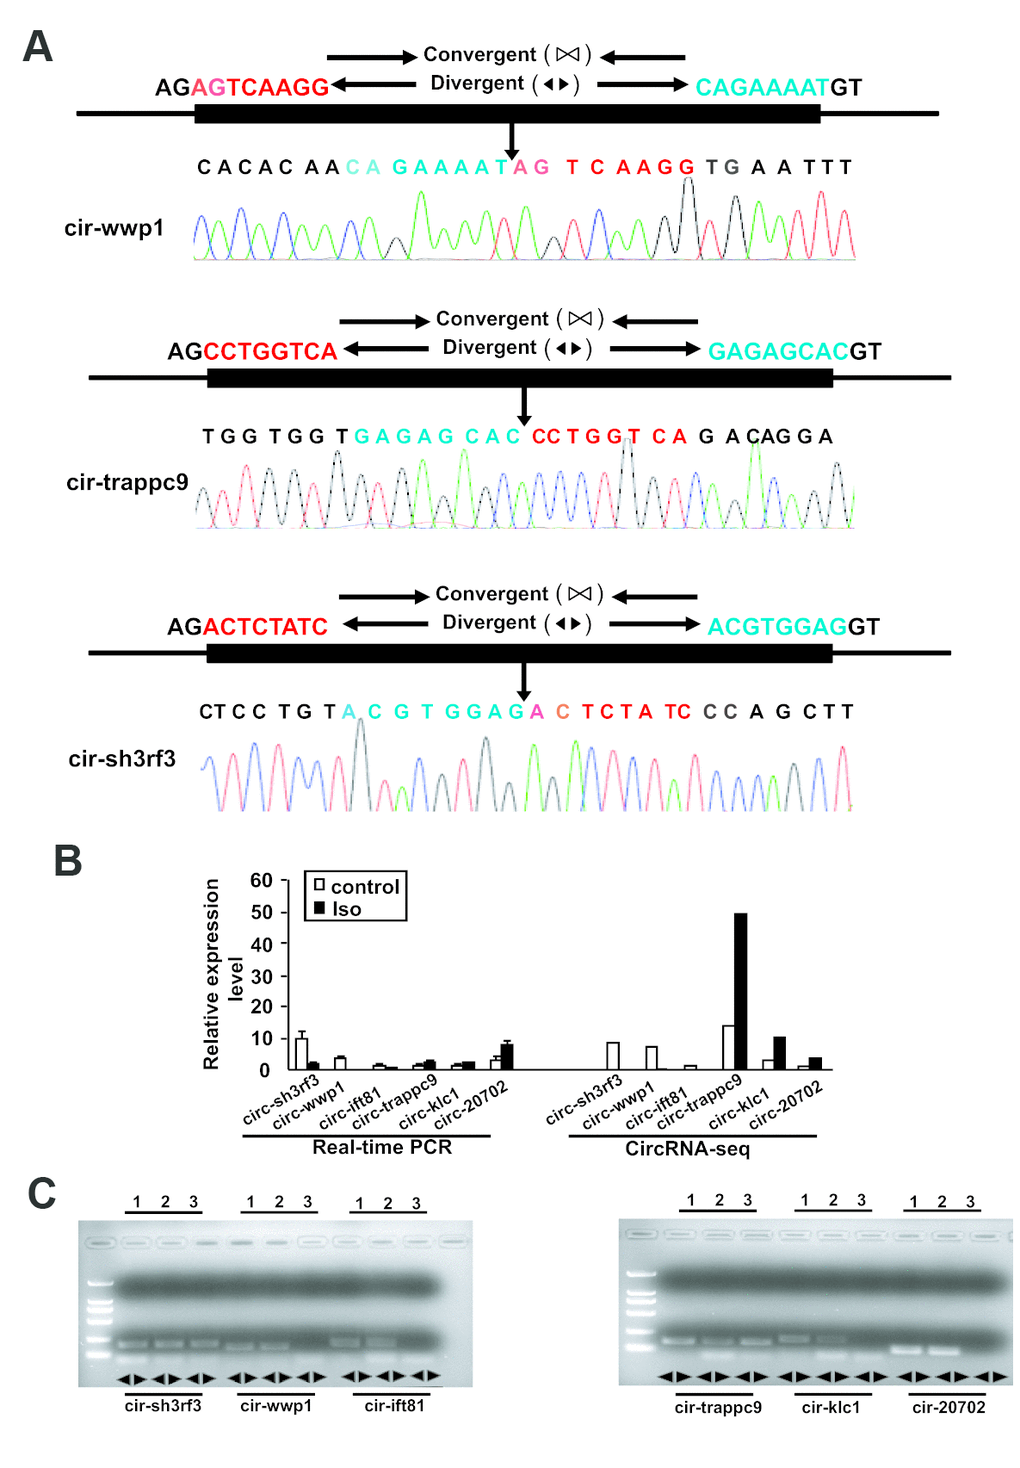 Validation of altered circRNA expression by qRT-PCR. (A) The amplified circRNAs were confirmed to be head-to-tail spliced via sequencing. (B) The expression levels of differentially expressed circRNAs were determined by Real-time PCR. The Data are means ± SEM with 3 mice per group. Seq: sequence. (C) The expression of circular RNAs in human skeletal muscle cells and the liver of mice. Lane 1, 2, and 3 represented the RNA in heart, liver and human skeletal muscle cells, respectively.